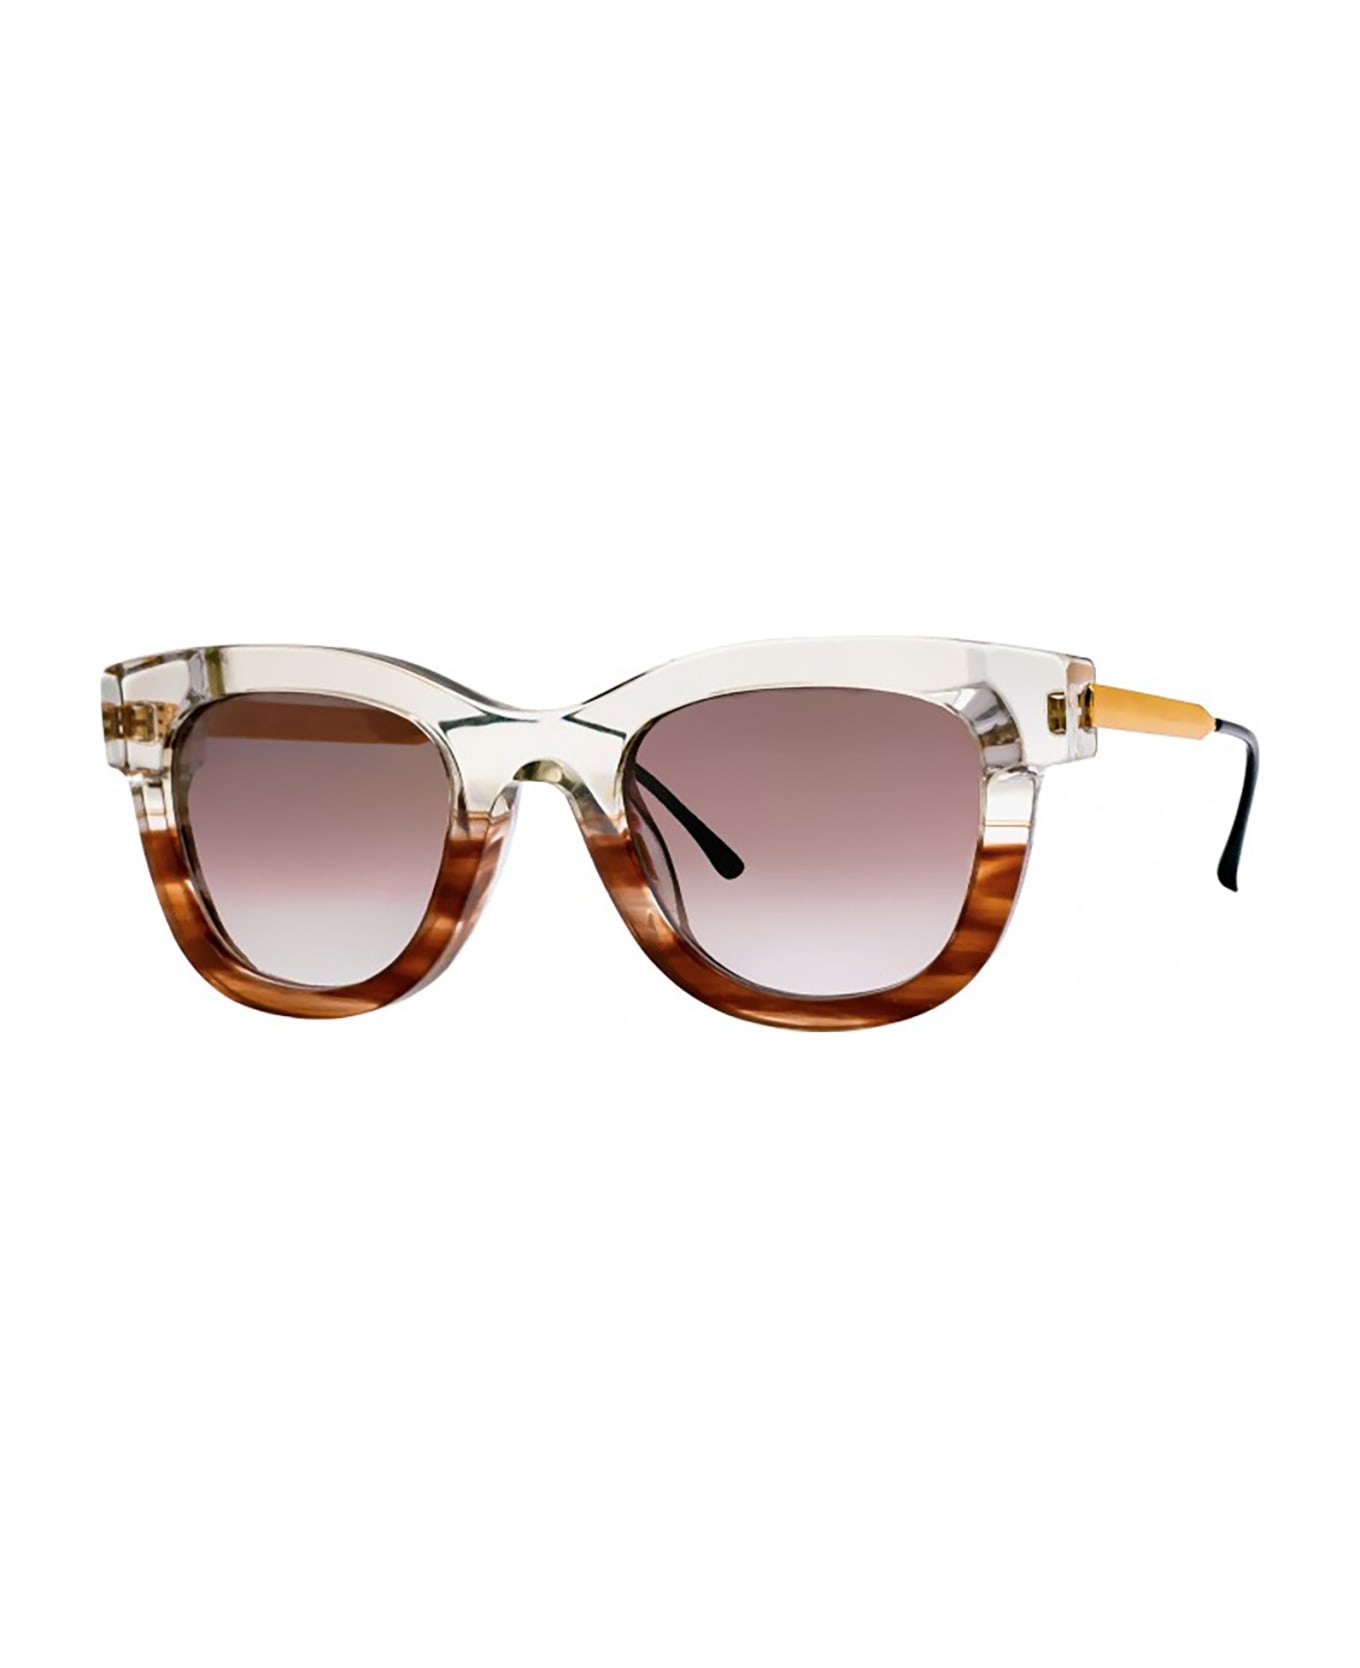 Thierry Lasry SEXXXY Sunglasses